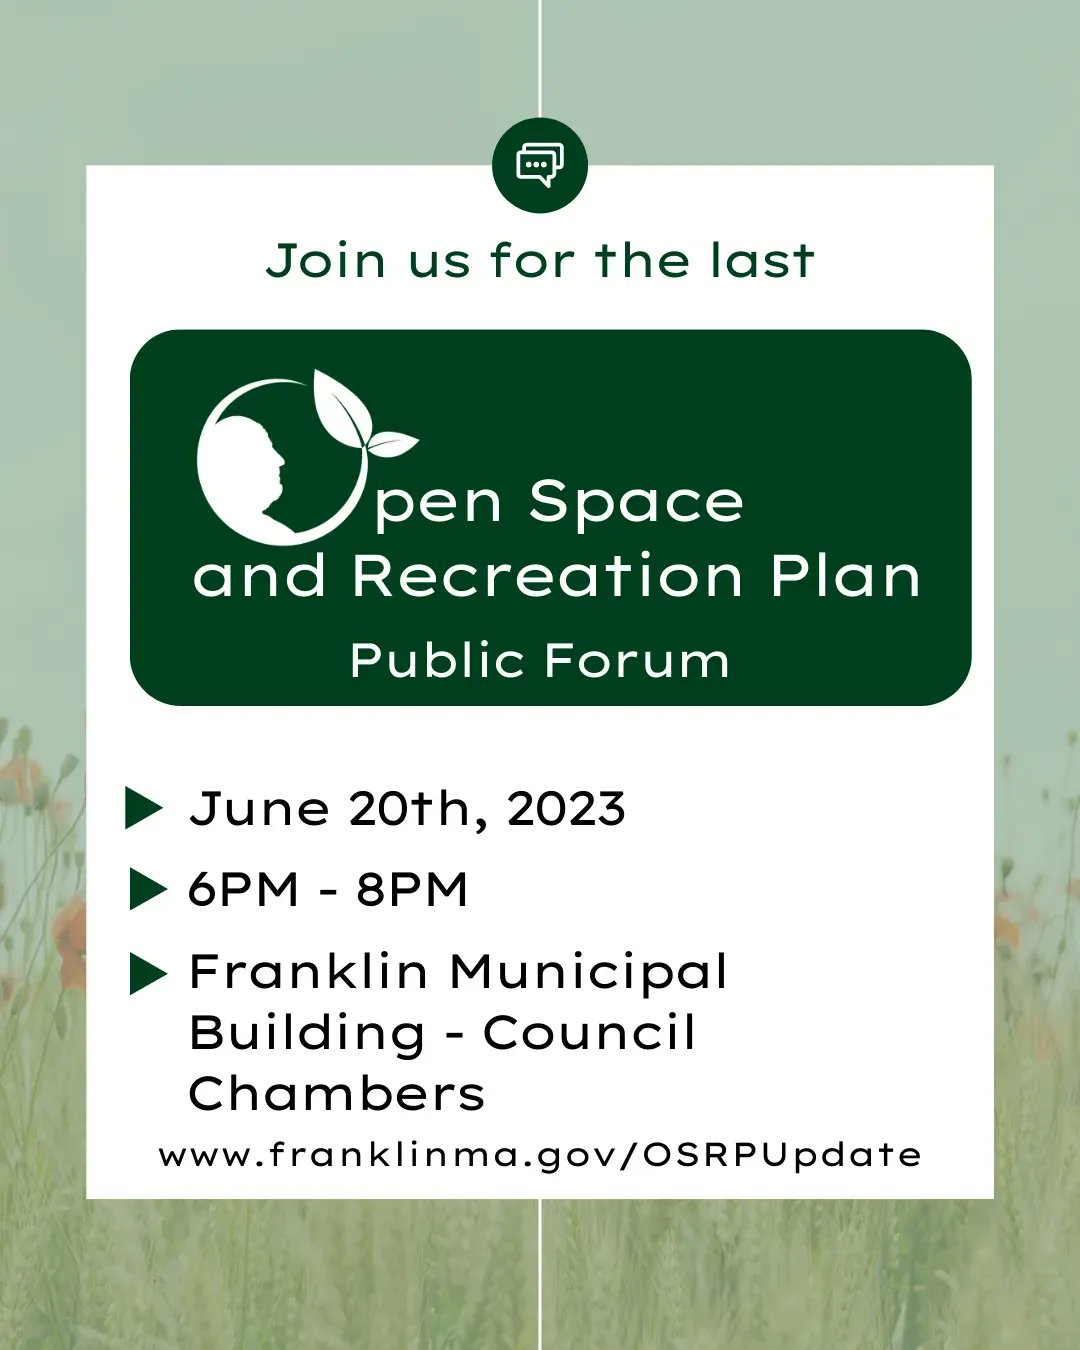 Open Space and Recreation Plan Public Forum - June 20, 2032 at 6 PM